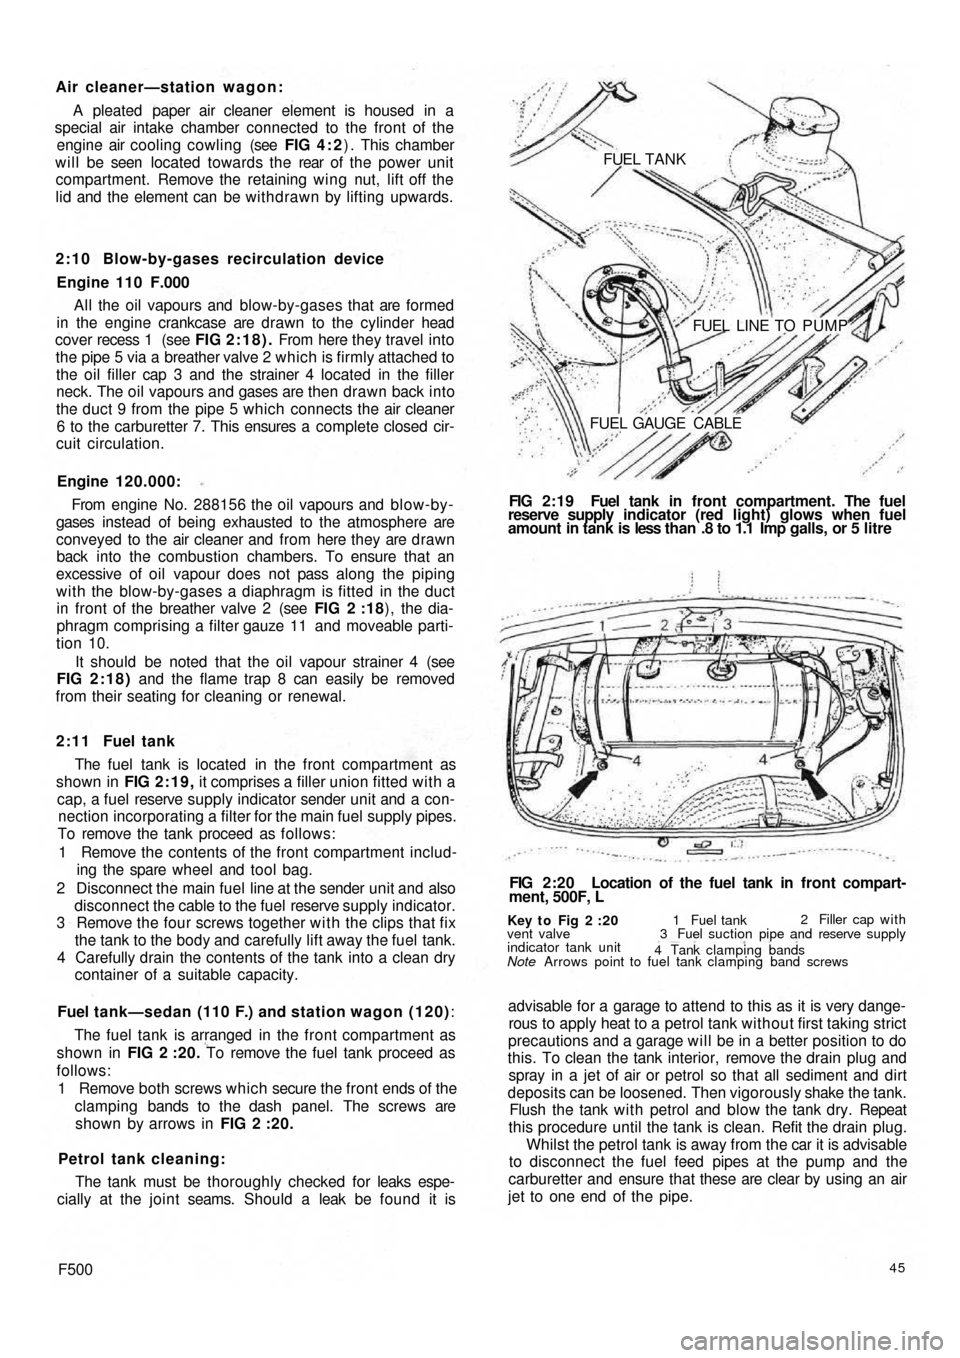 FIAT 500 1965 1.G Workshop Manual Air cleaner—station wagon:
A pleated paper air cleaner element is housed  in a
special air intake chamber connected to the front of the
engine air cooling cowling (see FIG 4 : 2) . This chamber
will